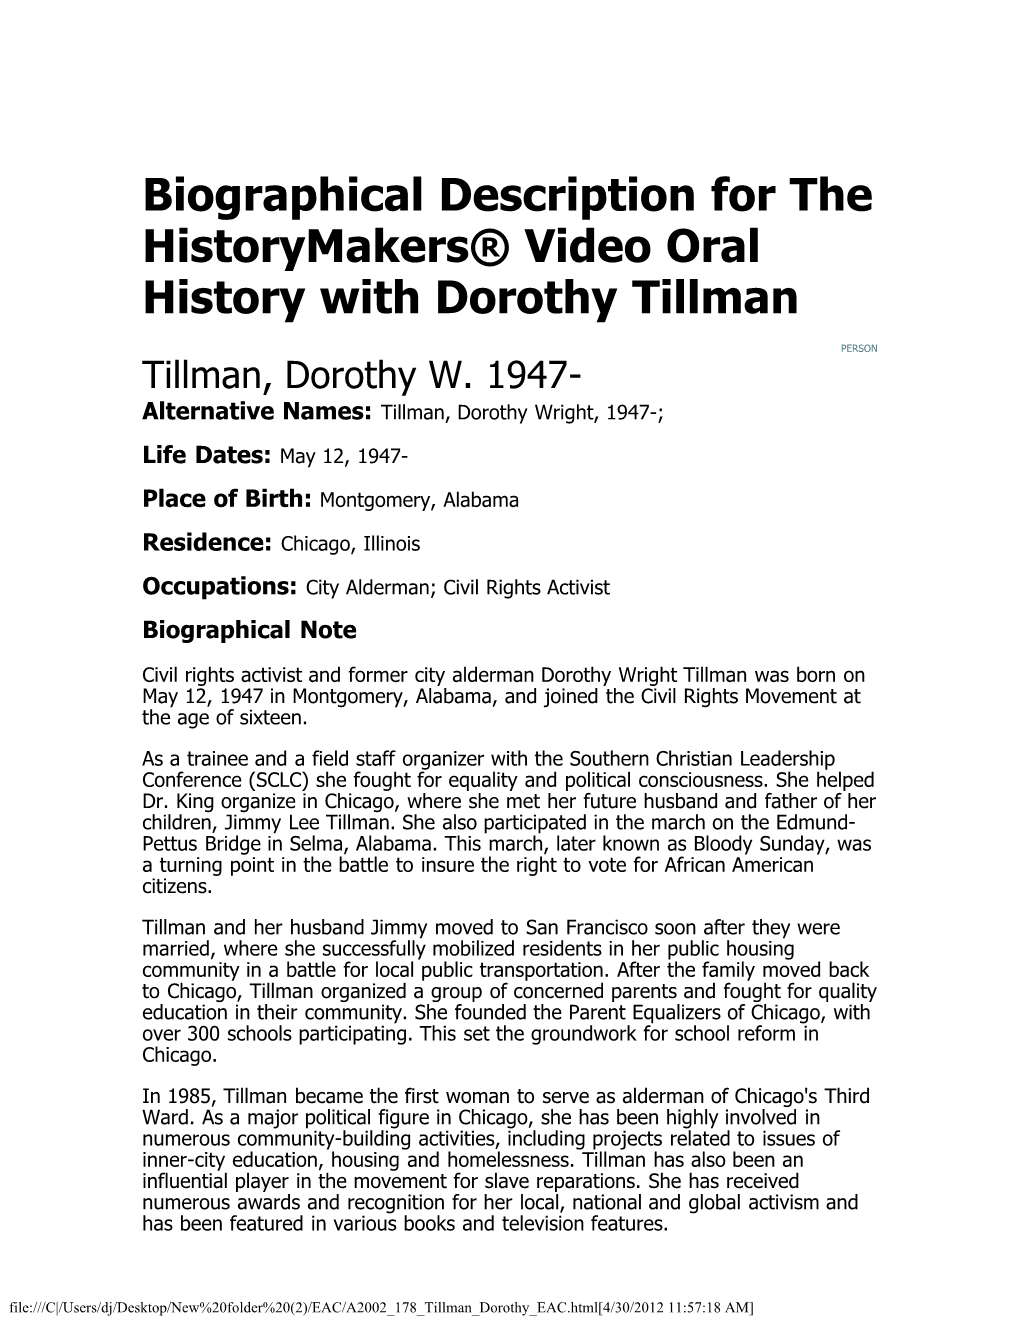 Biographical Description for the Historymakers® Video Oral History with Dorothy Tillman